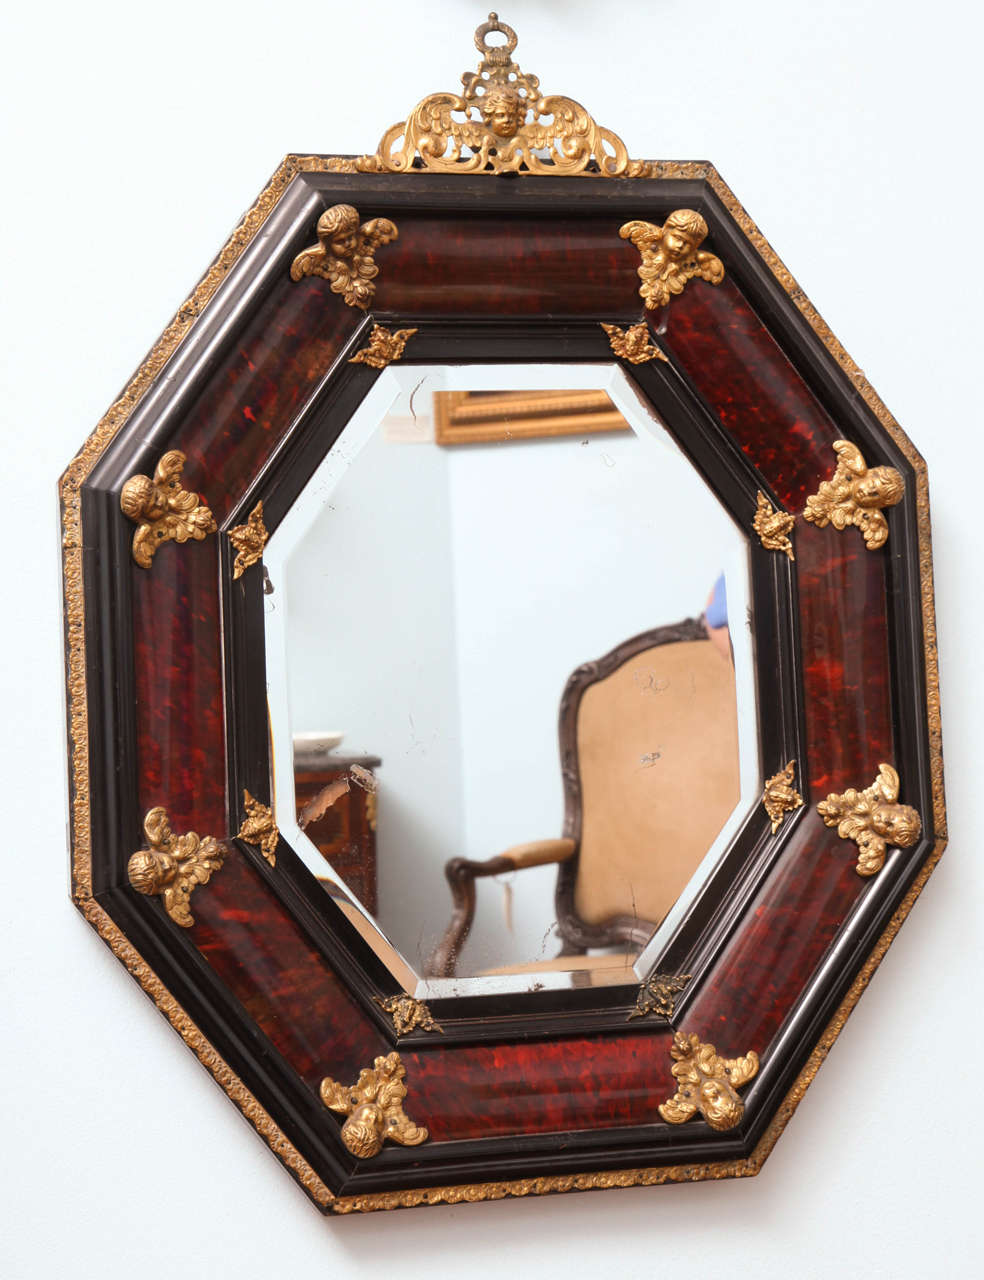 A tortoiseshell octagonal mirror with applied gilded bronze putti with foliate motif on the crown (cimasa) and eight larger gilded bronze putti in the corners, eight small winged motif on the interior corners; with ebonized molding and gilded bronze